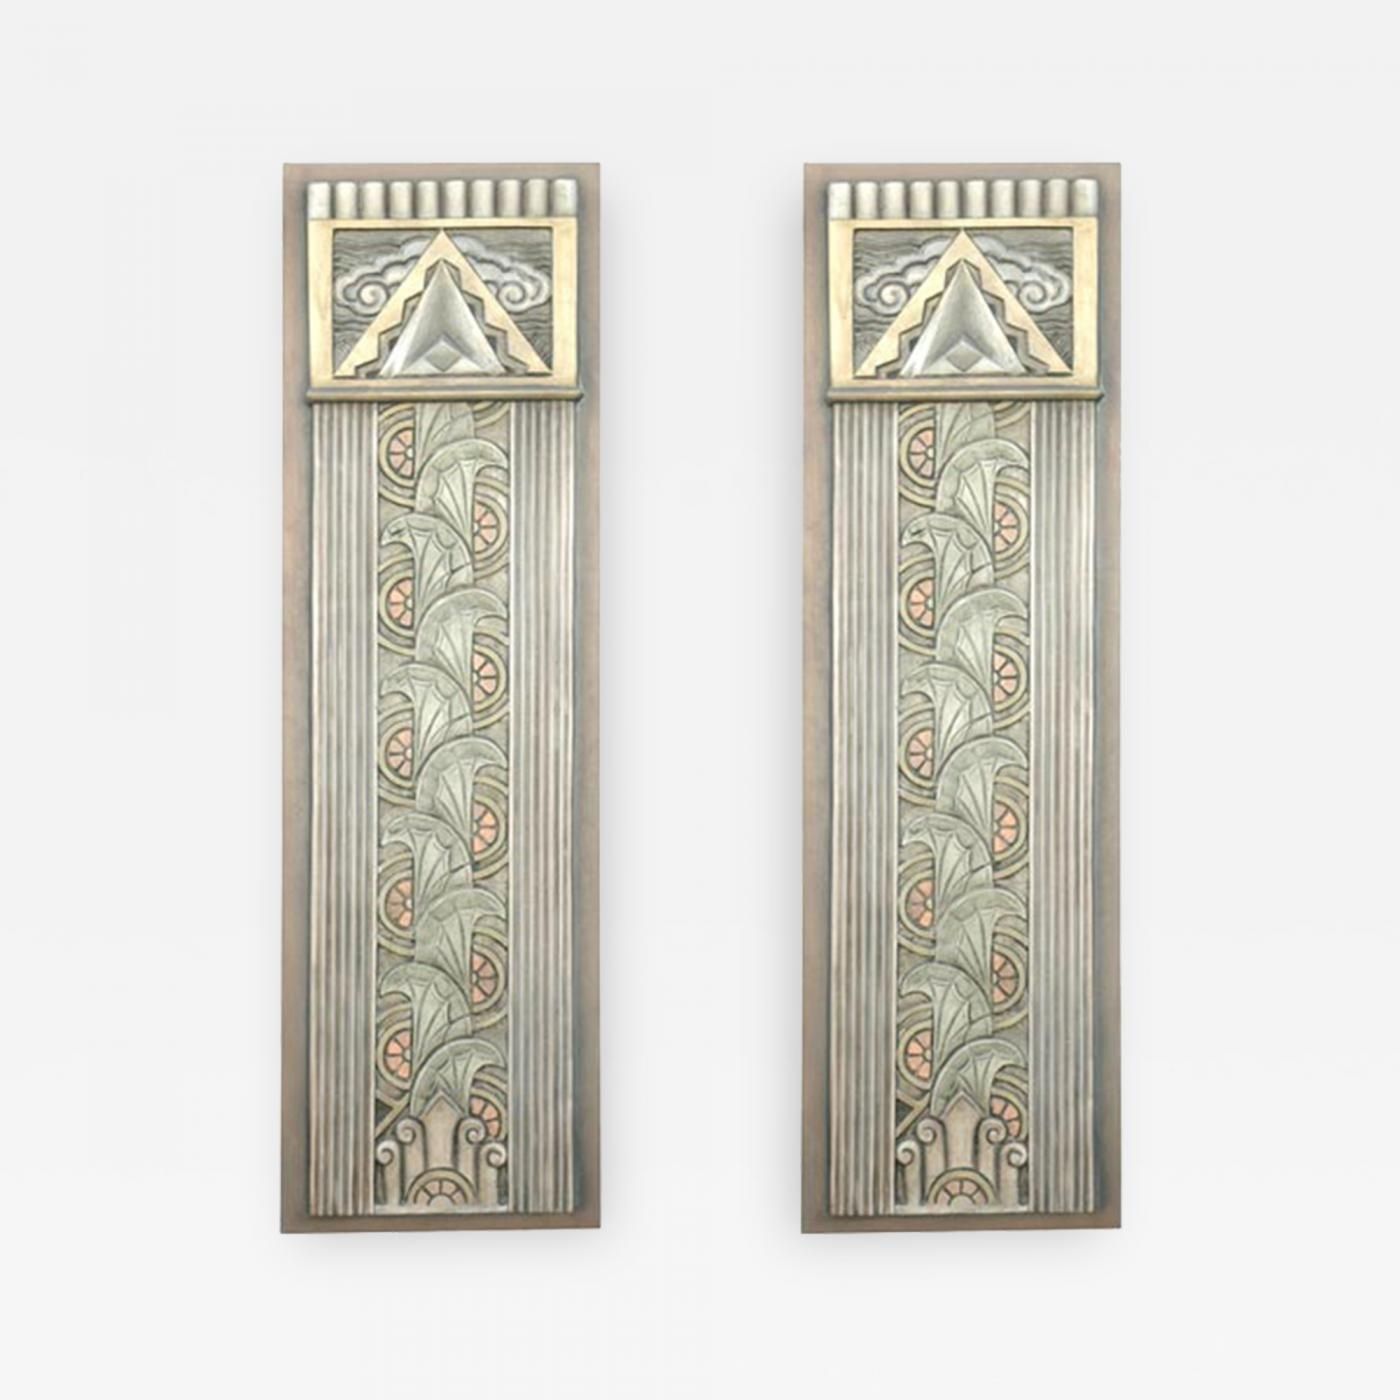 Art Deco Movie Theater Wall Plaques Intended For Latest Art Deco Wall Art (View 18 of 20)